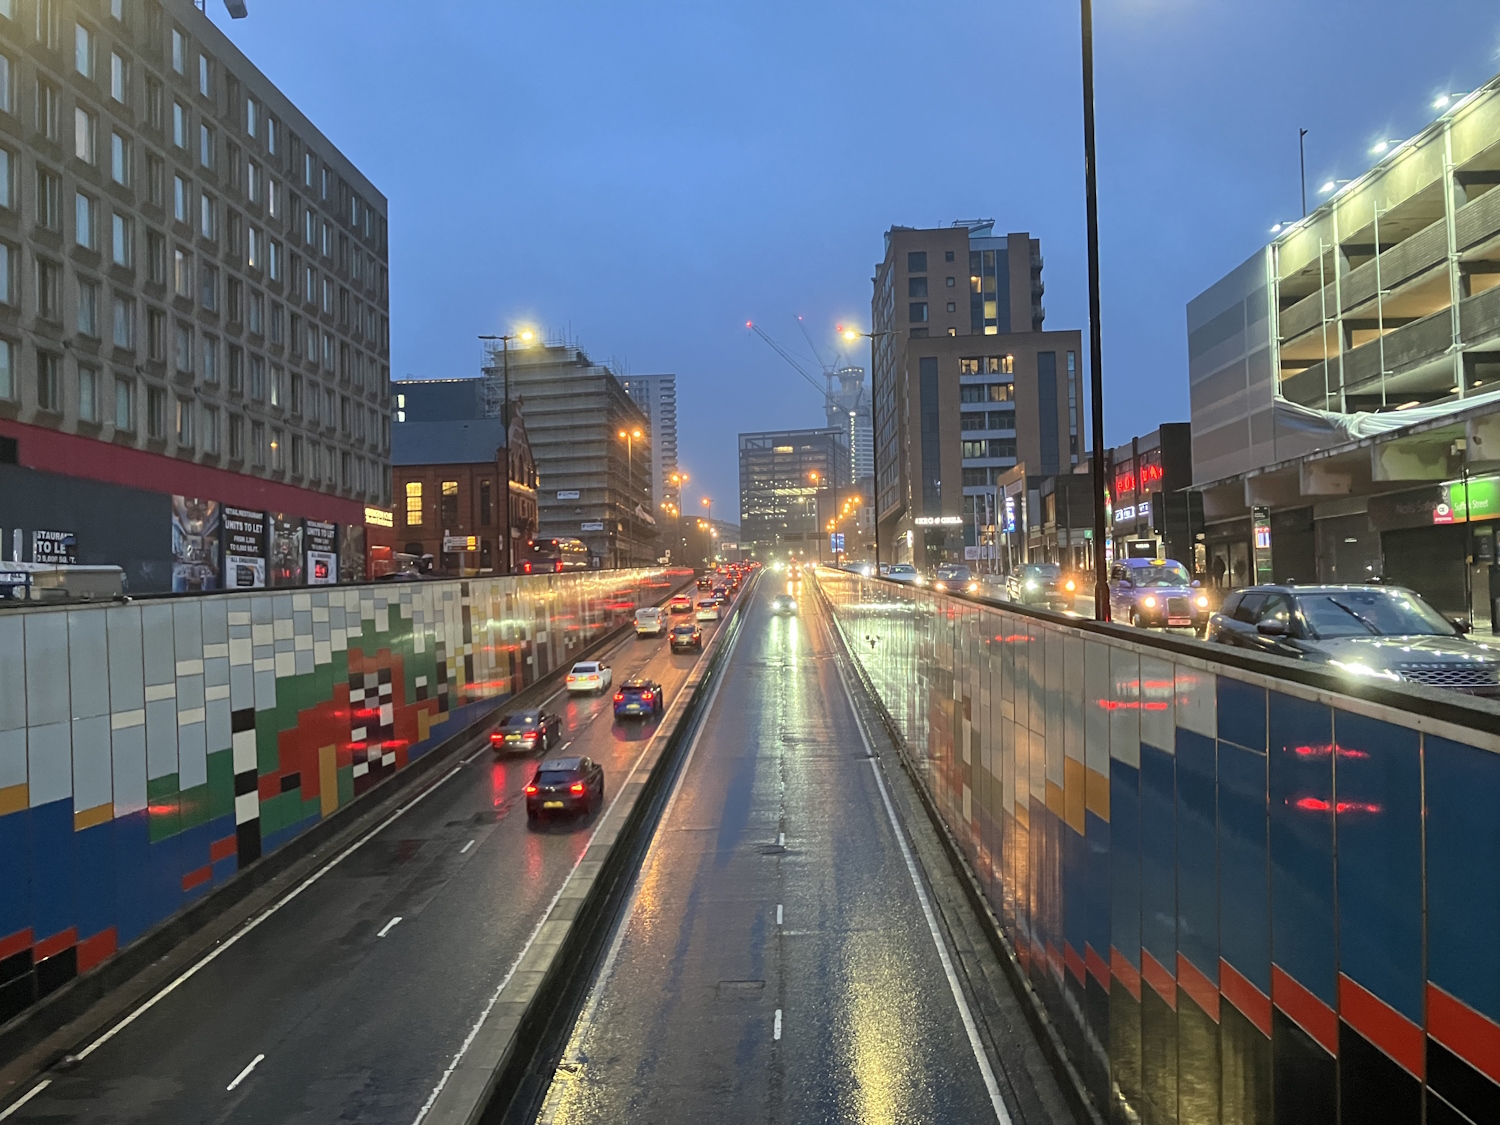 Wet evening on the Suffolk Street Queensway by Big l